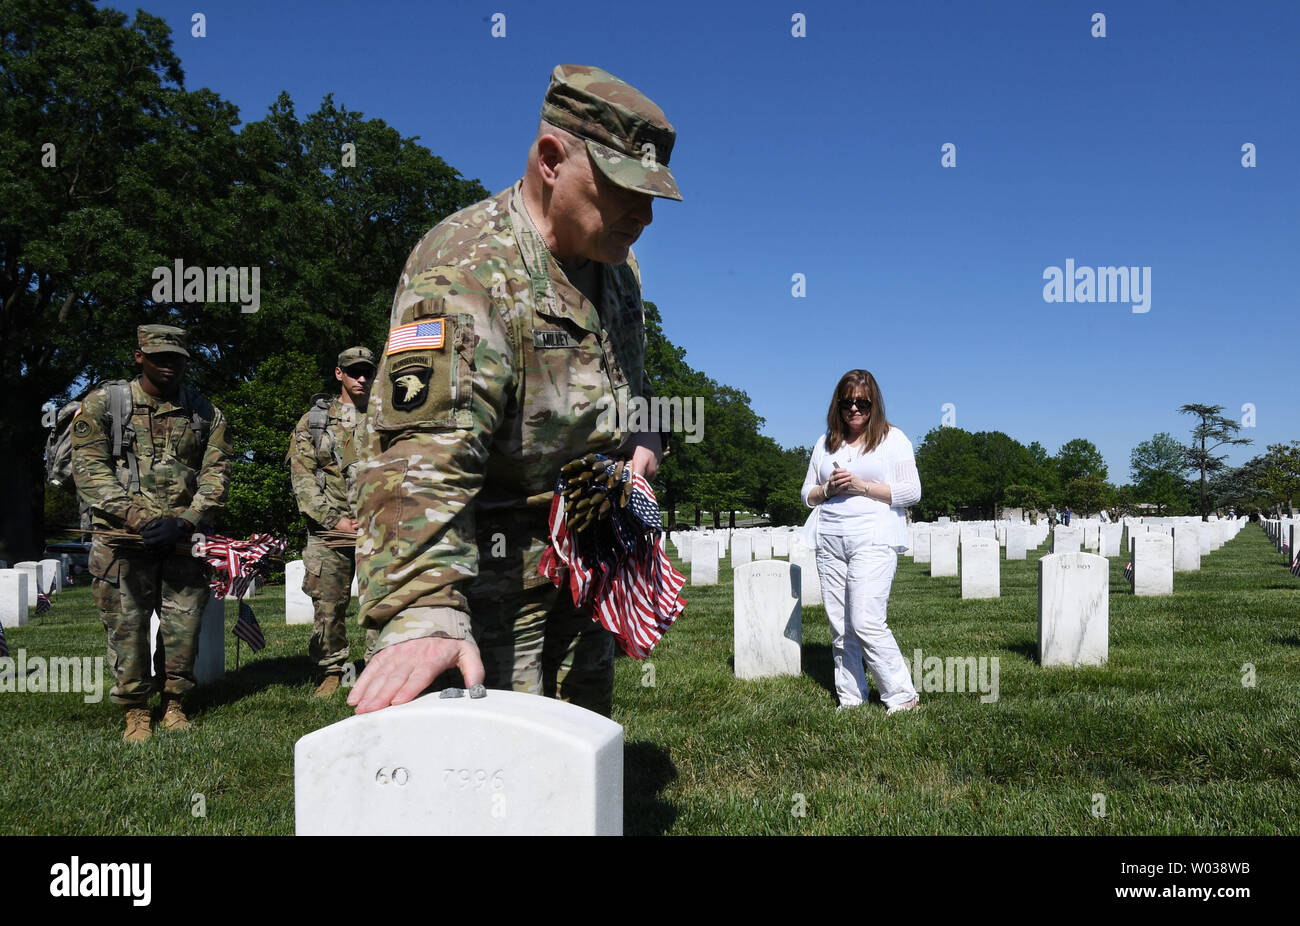 Four-Star General Mark Milley taps the gravestone after placcing a flag in front of the gravesite of Special Forces soldier Michael Yury Tarlavsky, who died in 2004 during the Iraq war, at Arlington National Cemetery during the 'Flags In' tradition in Arlington, Virginia on May 24, 2018.  Tarlavsky's wife Tricia is in the background. Milley is 39th Army Chief of Staff of the Army and the highest ranking military officer in the the Army. The 3rd U.S. Infantry Regiment (The Old Guard) has honored veterans for more than 60 years by placing flags at their gravesites. Photo by Pat Benic/UPI Stock Photo